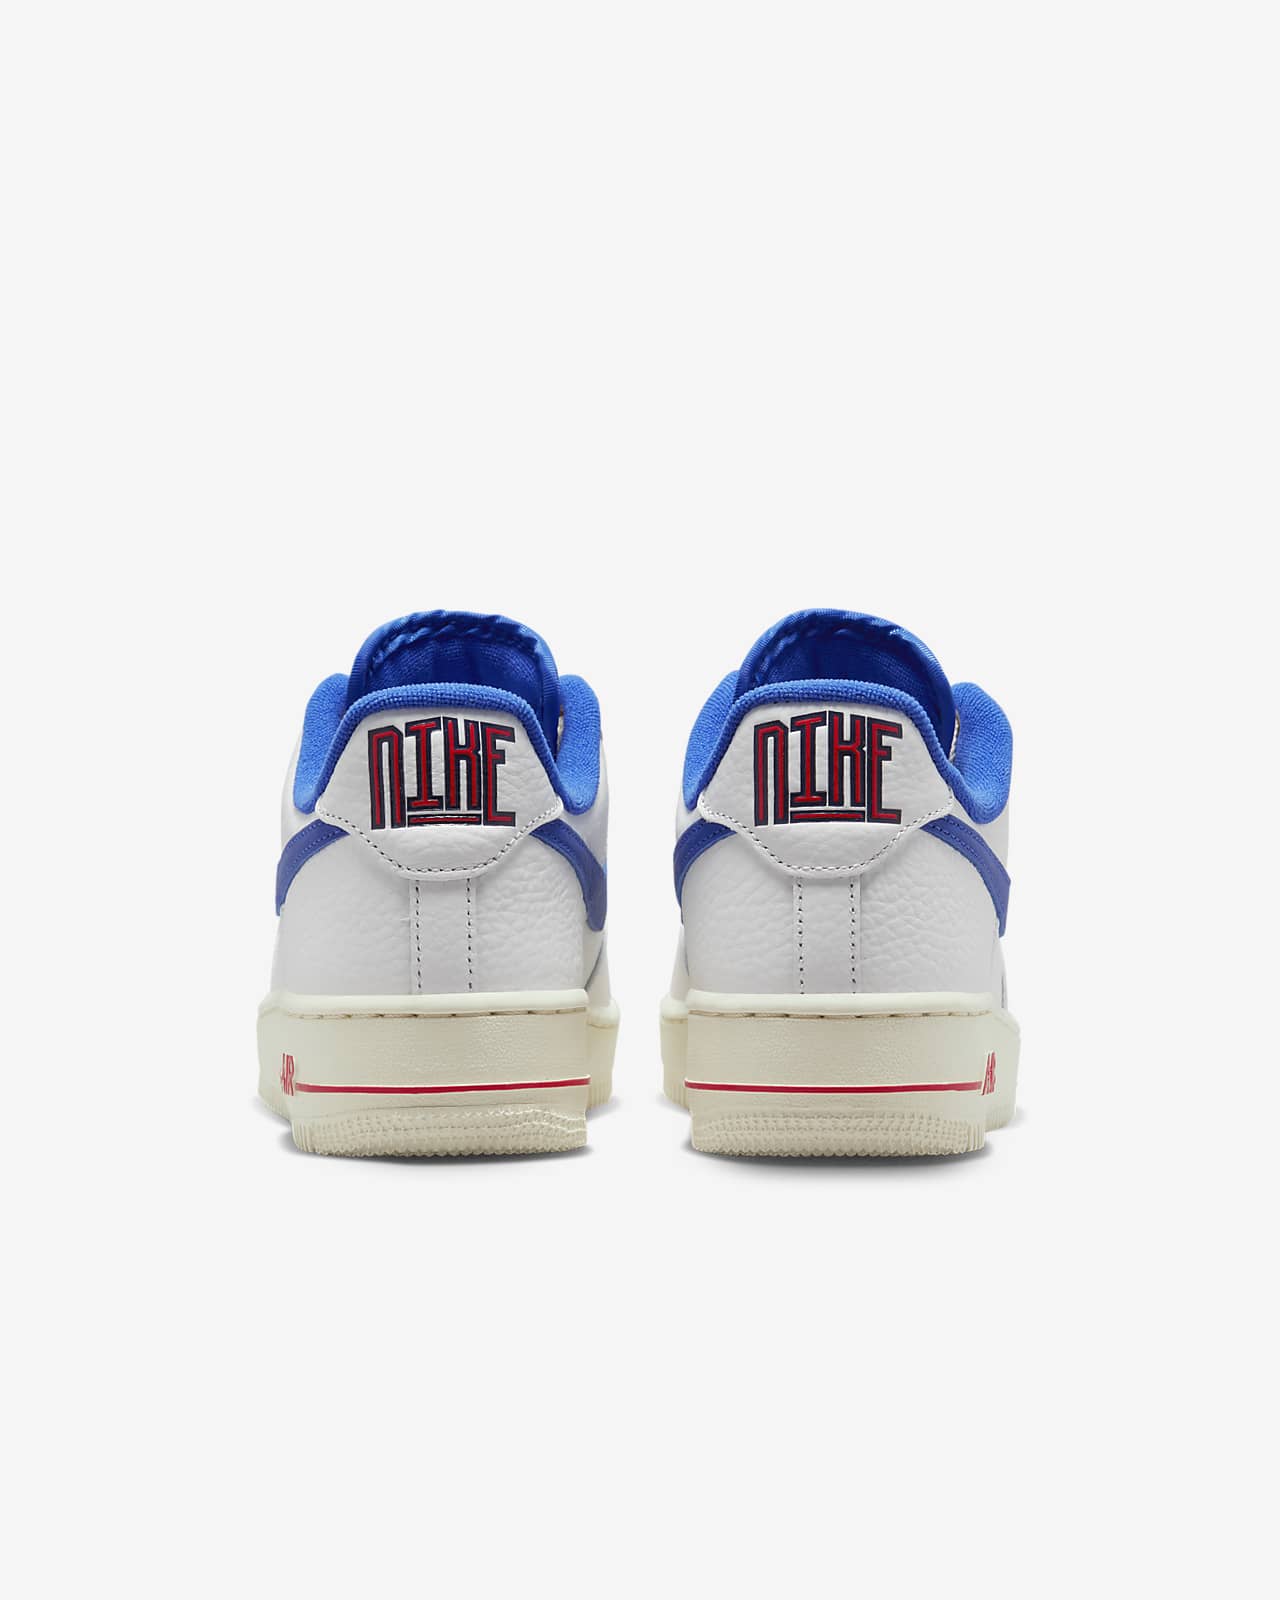 DR0148-100] Nike Women's Air Force 1 07 LX White/Blue *NEW*